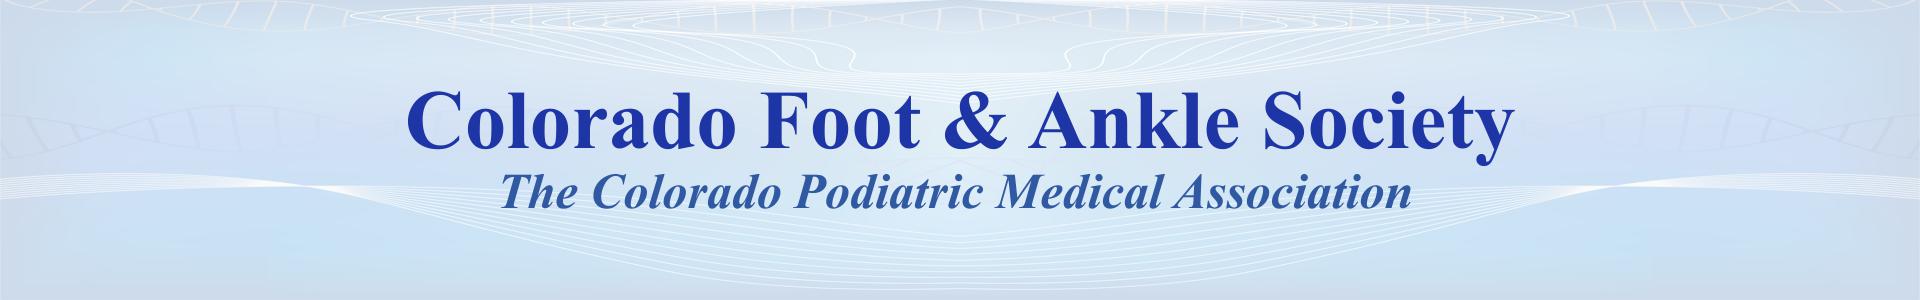 Colorado Foot & Ankle Society